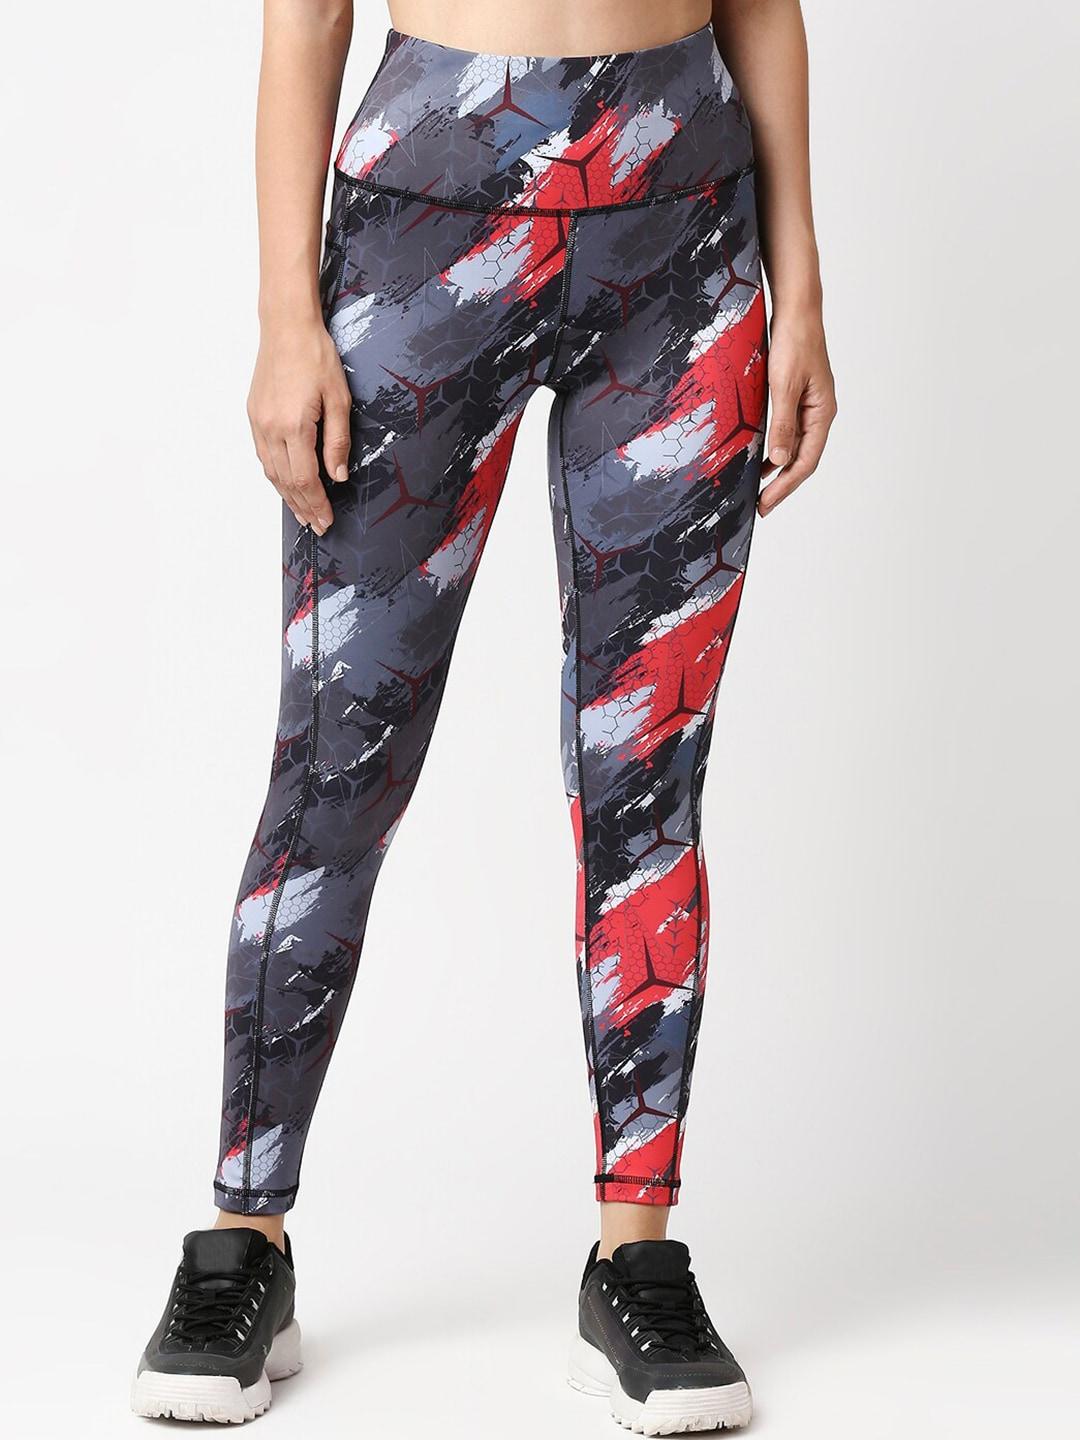 soie-women-printed-high-waist-ankle-length-quick-dry-sports-tights